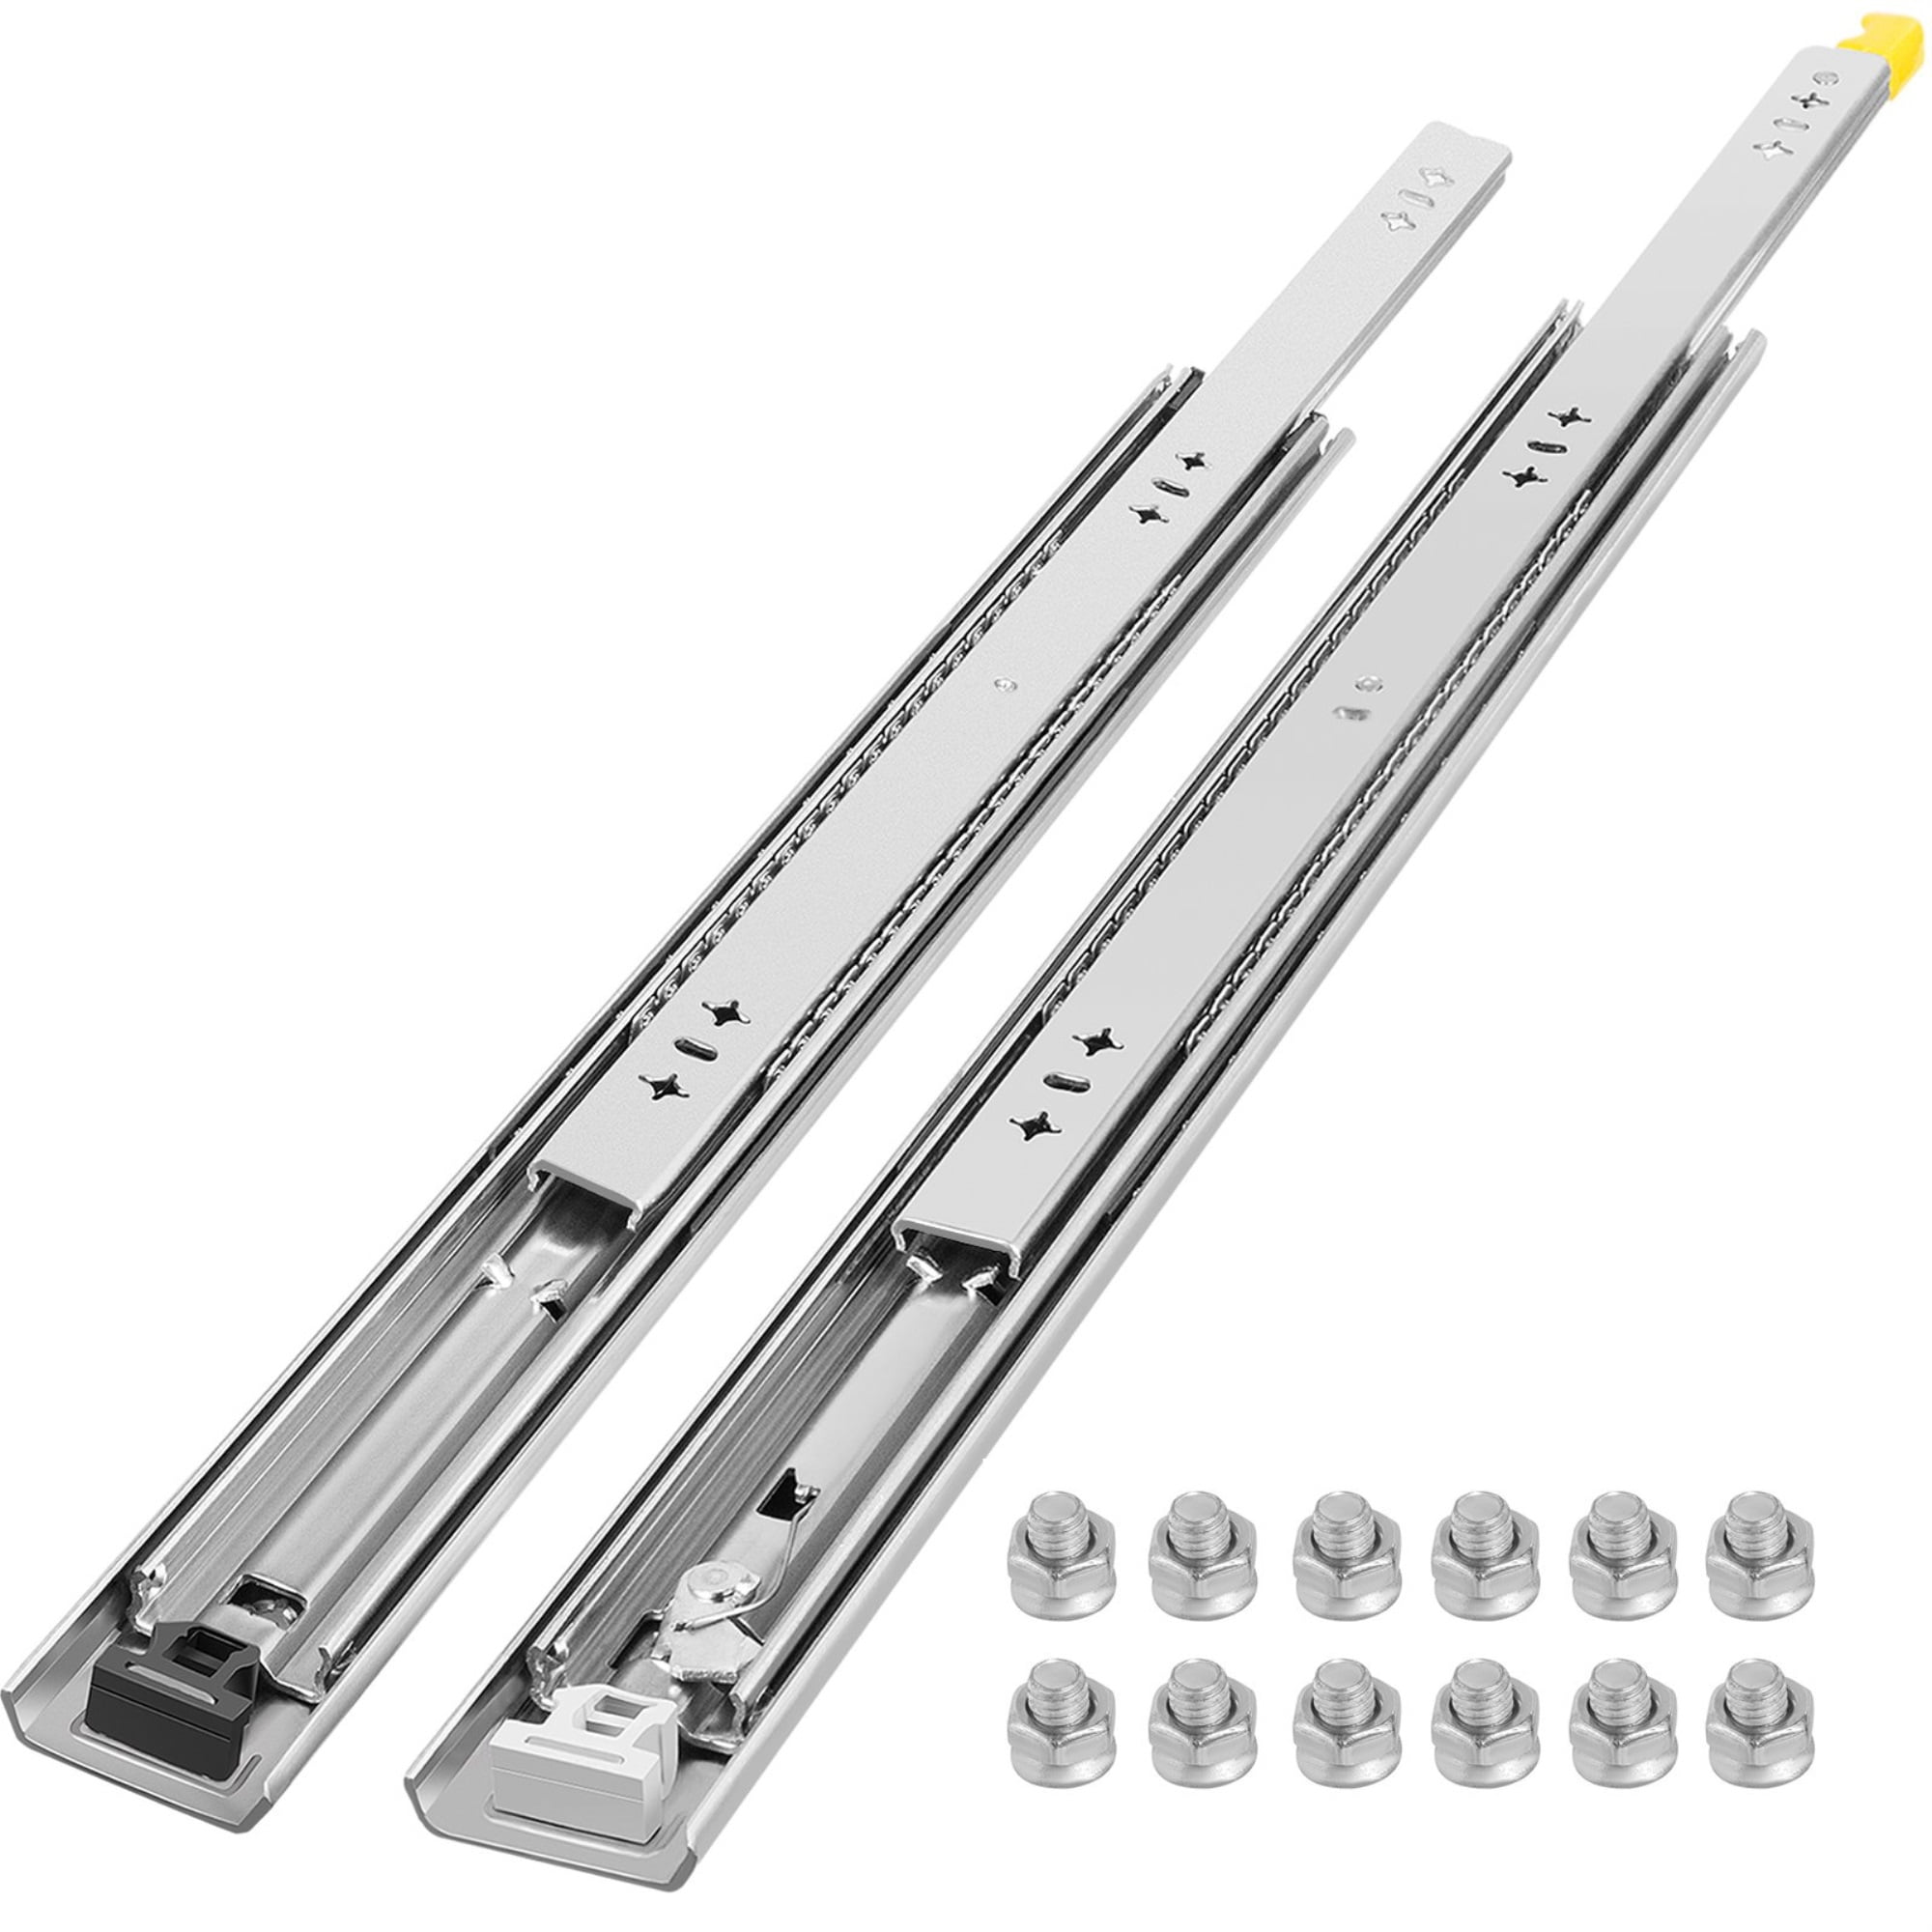 AOLISHENG Soft Close Bottom Mount Drawer Slides 12 Inch Full Extension Ball Bearing Hidden Undermount Runners Locking Devices Concealed Rails Track 100 lb Load Capacity 1 Pair